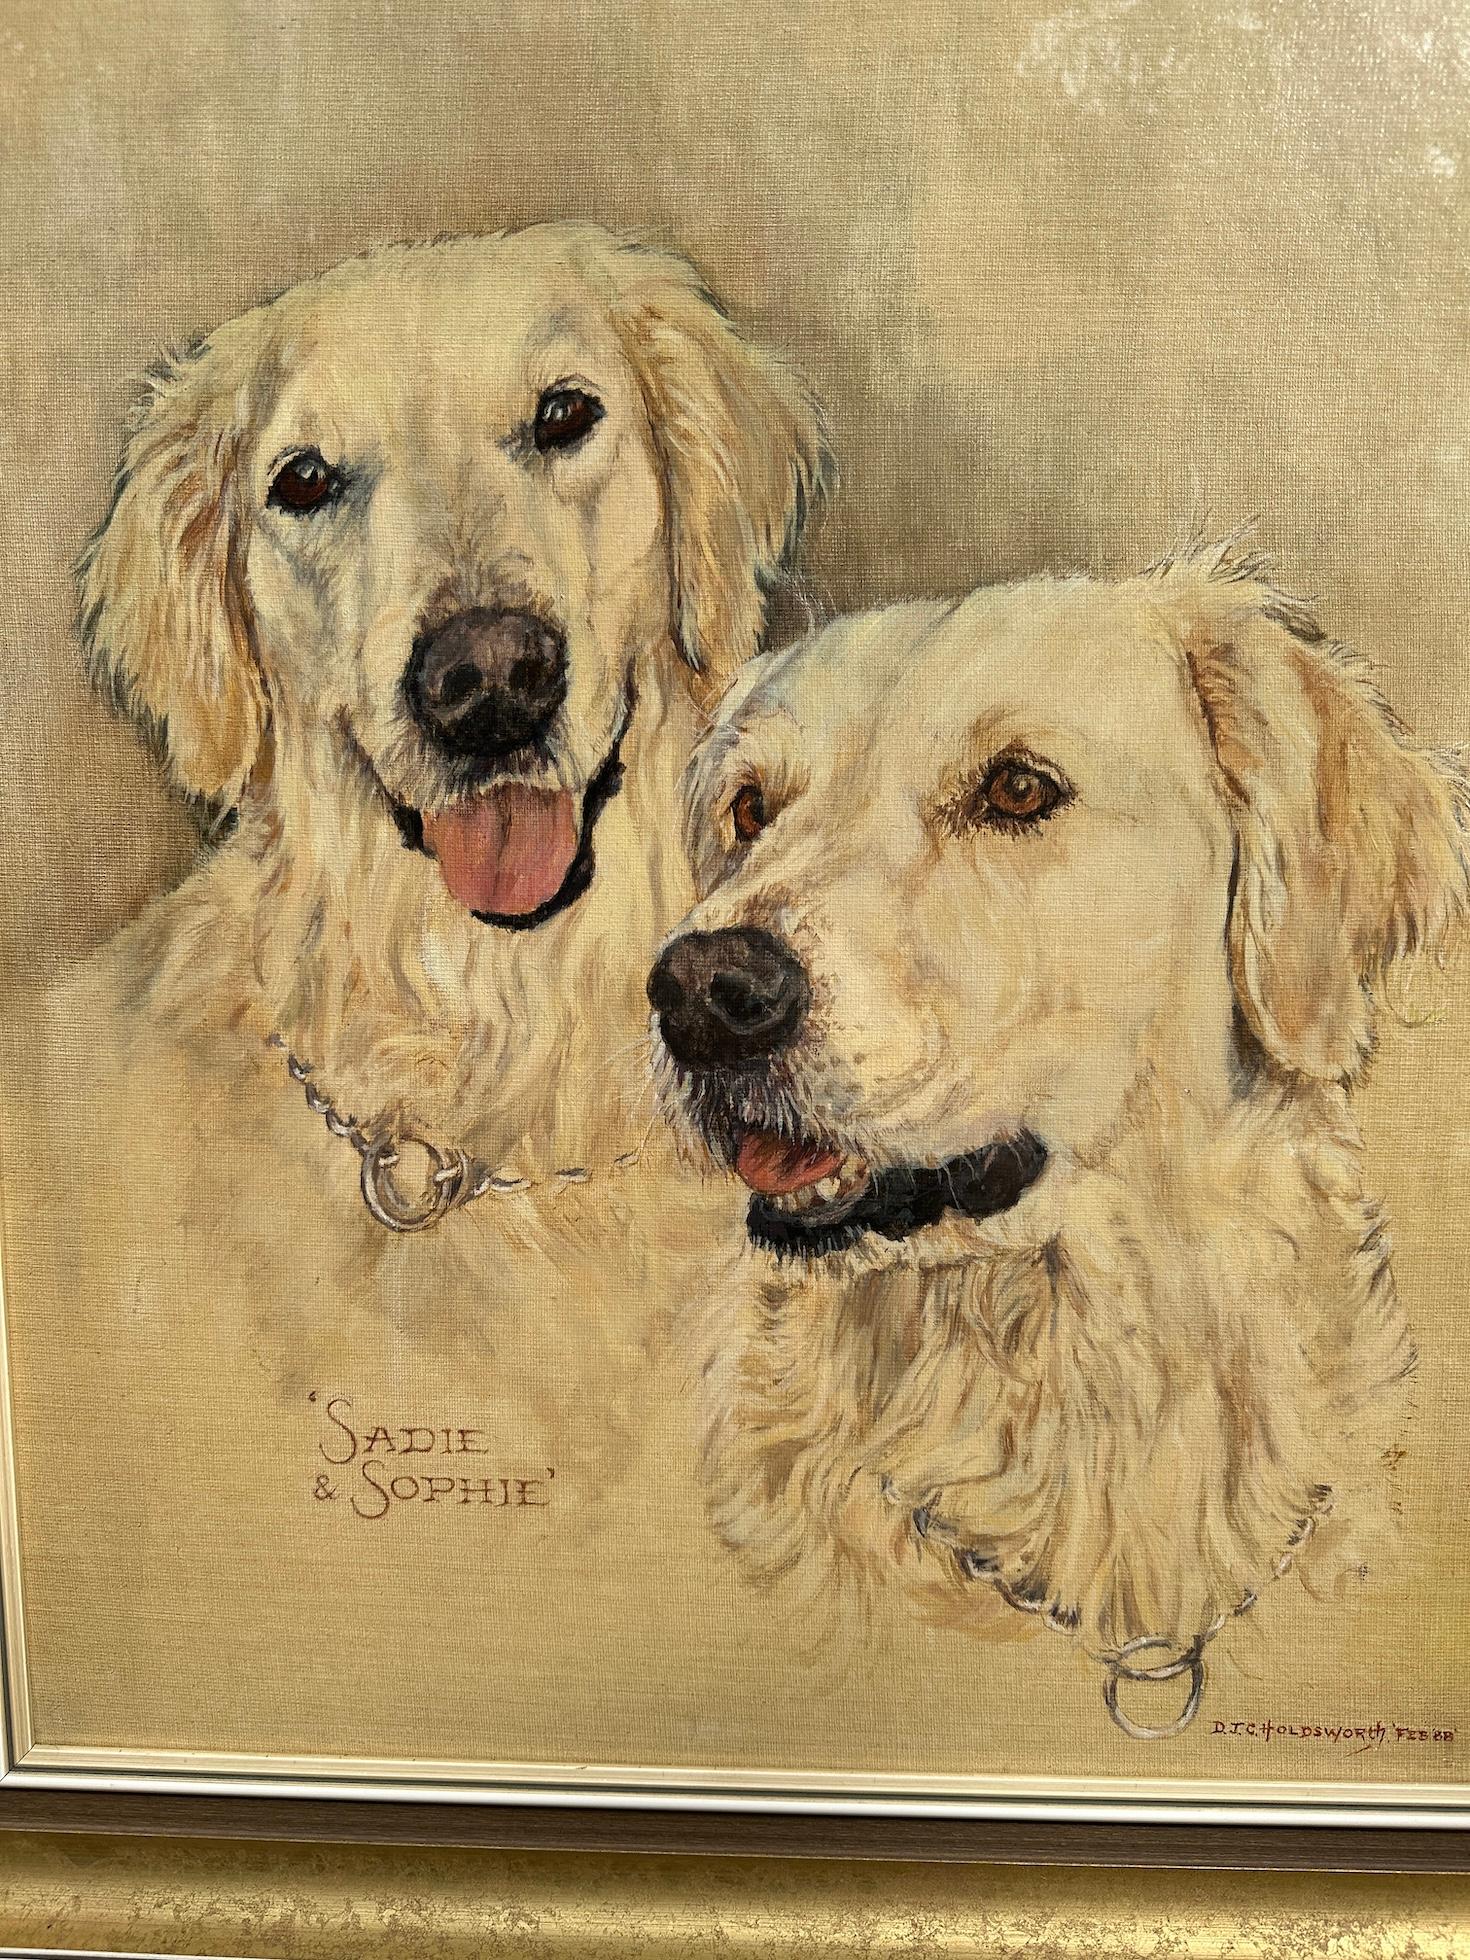 20th century English portrait of two Labrador Retriever dogs Sadie & Sophie - Painting by D.J.Holdsworth